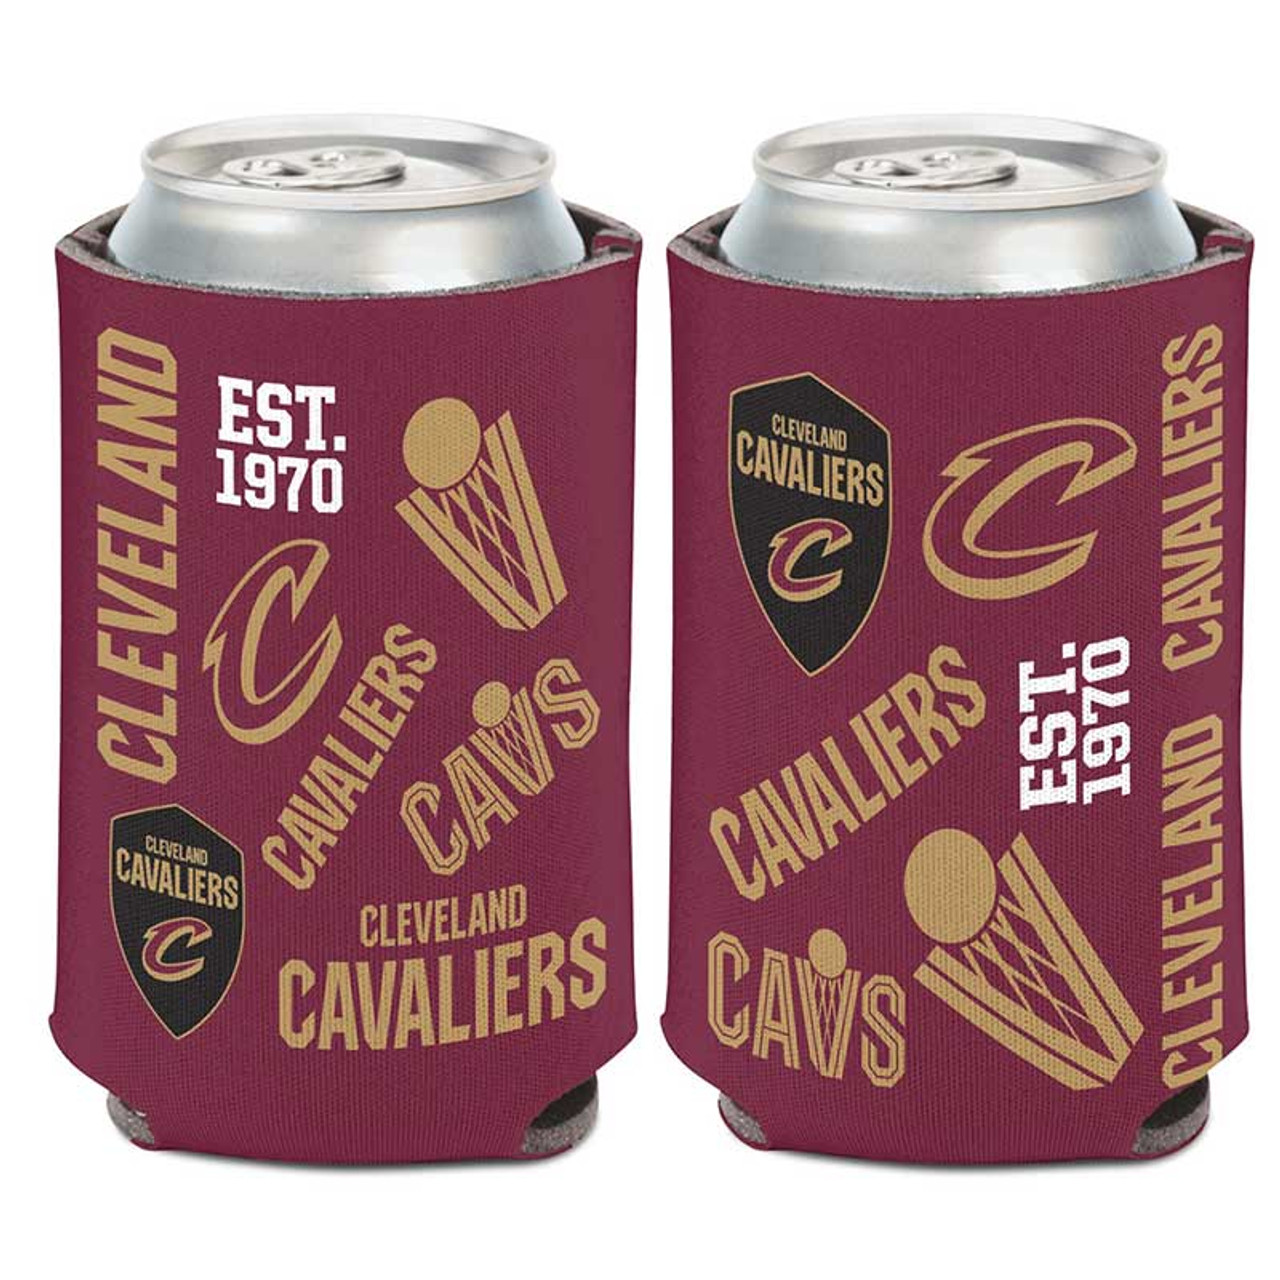 Looking at Cleveland Cavaliers logos from 1970 to current 